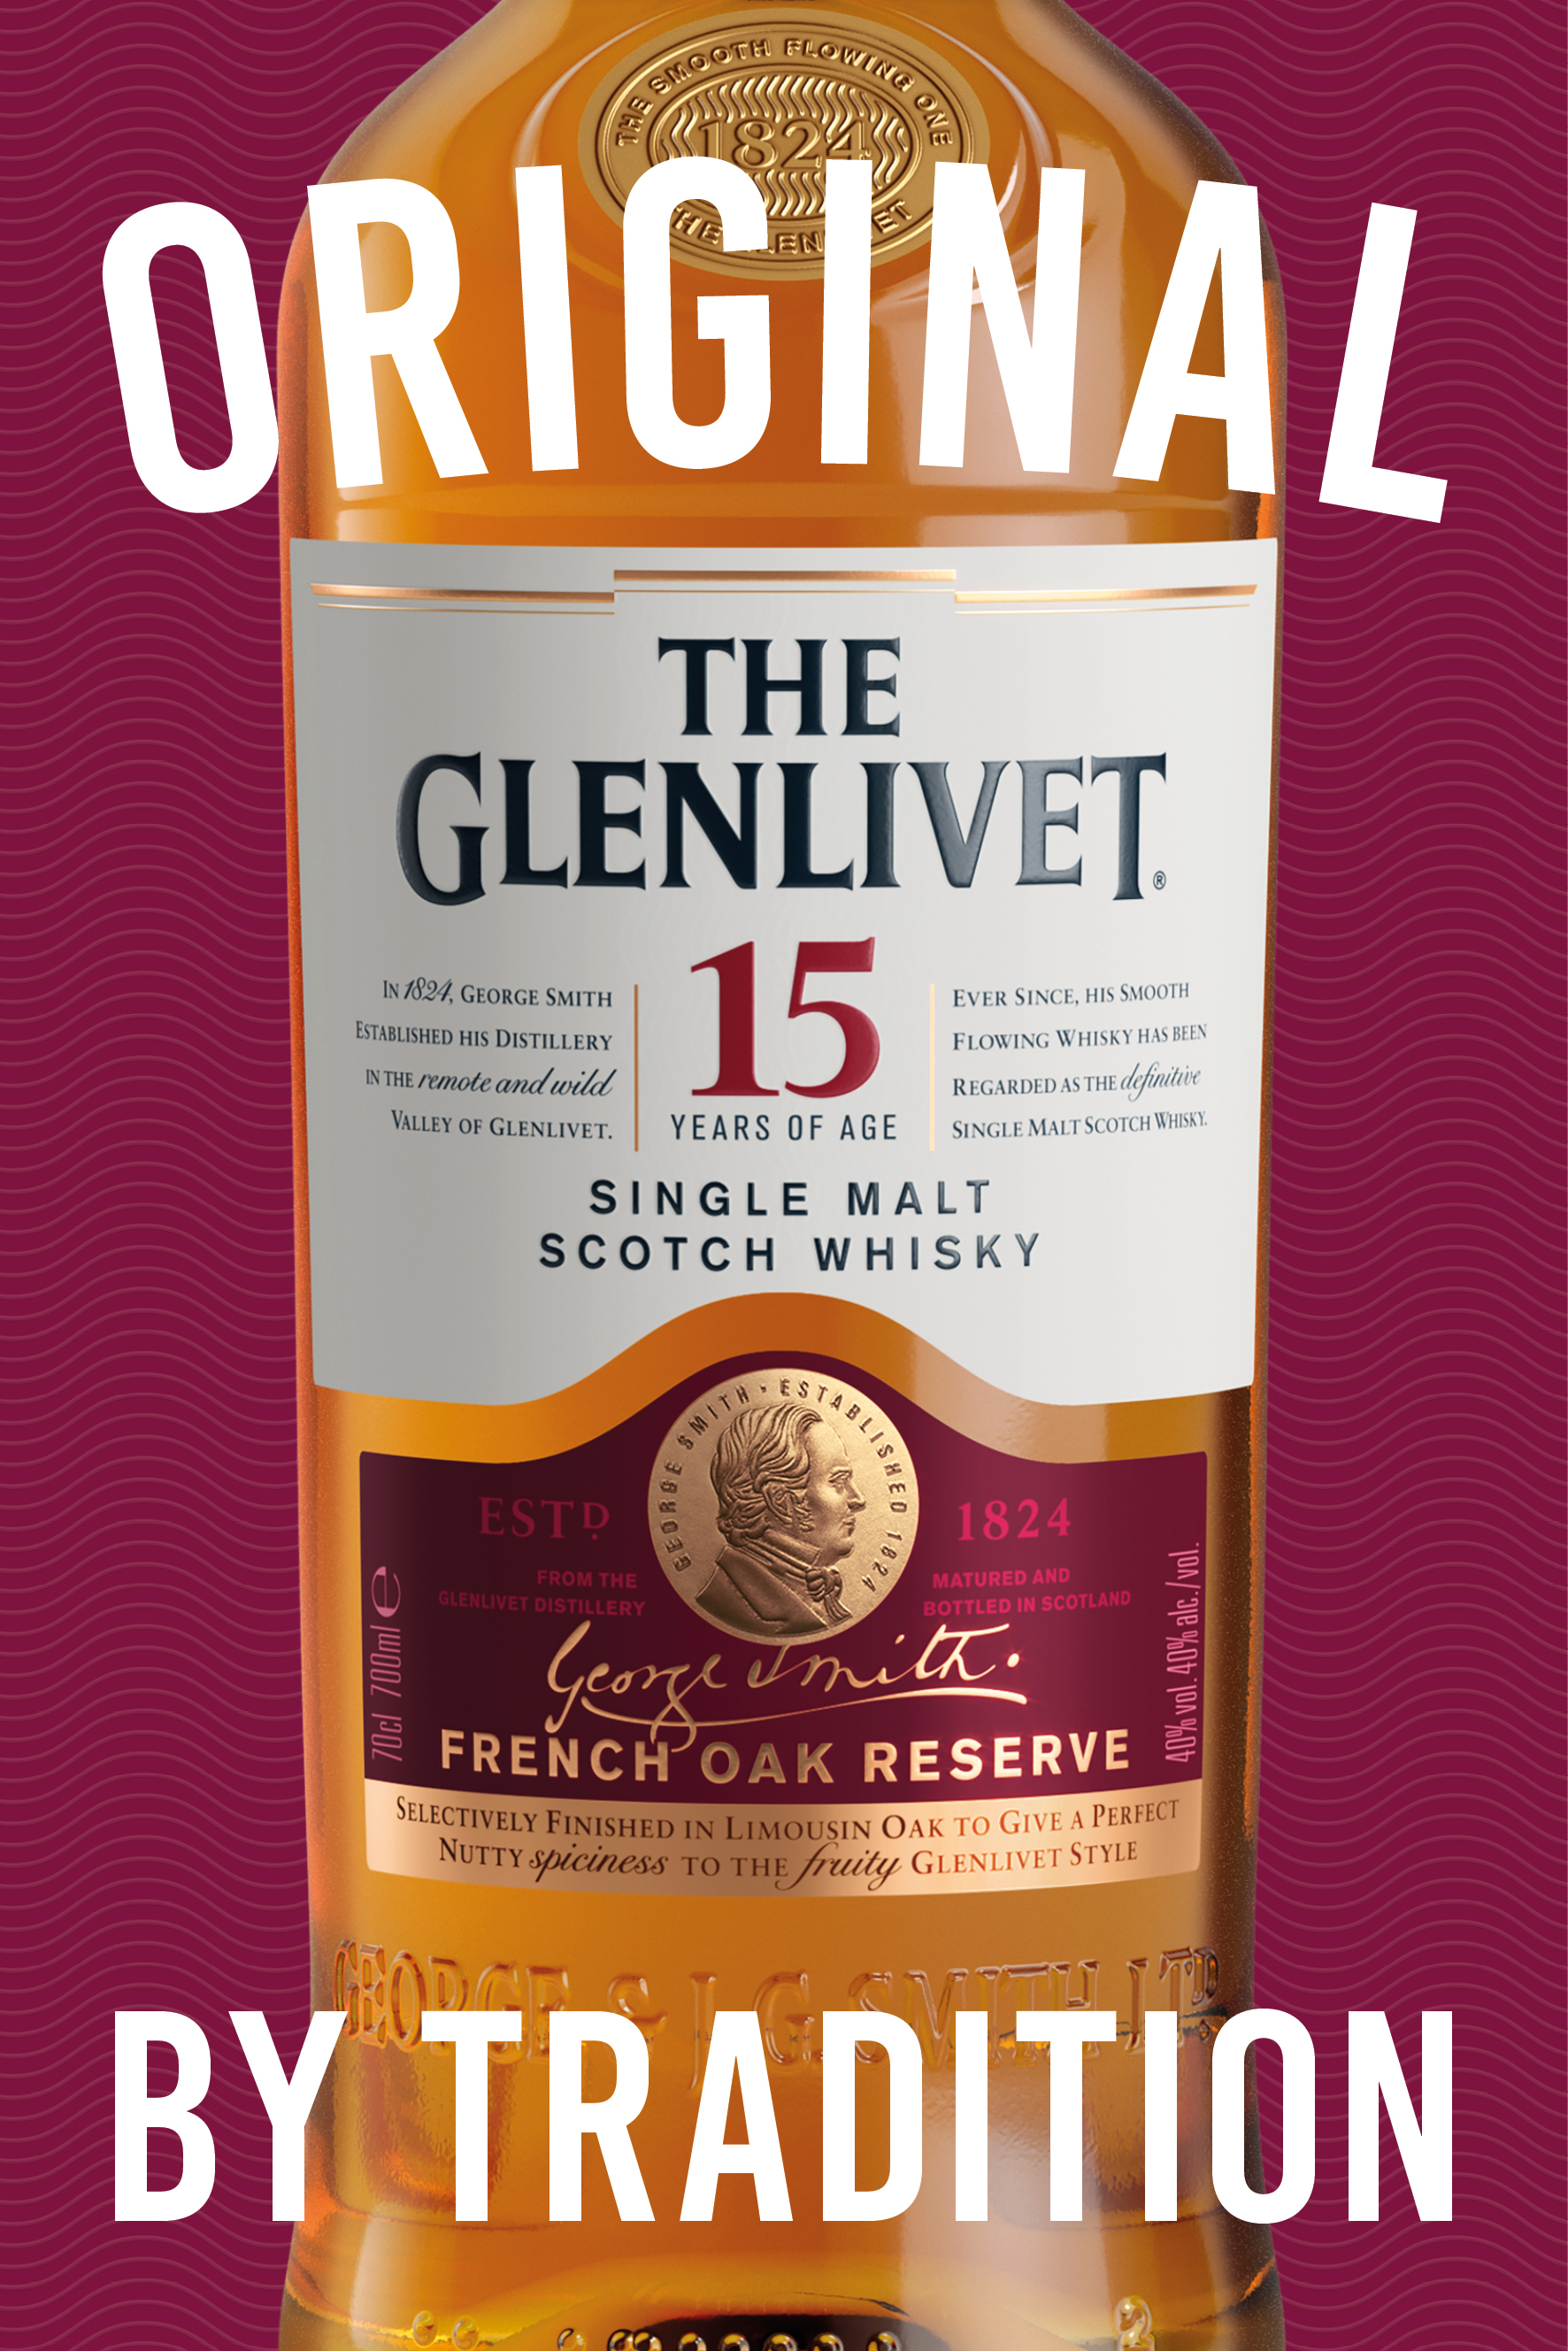 Bottle of The Glenlivet 15yo on Maroon background for "Original by Tradition" campaign by CPB London